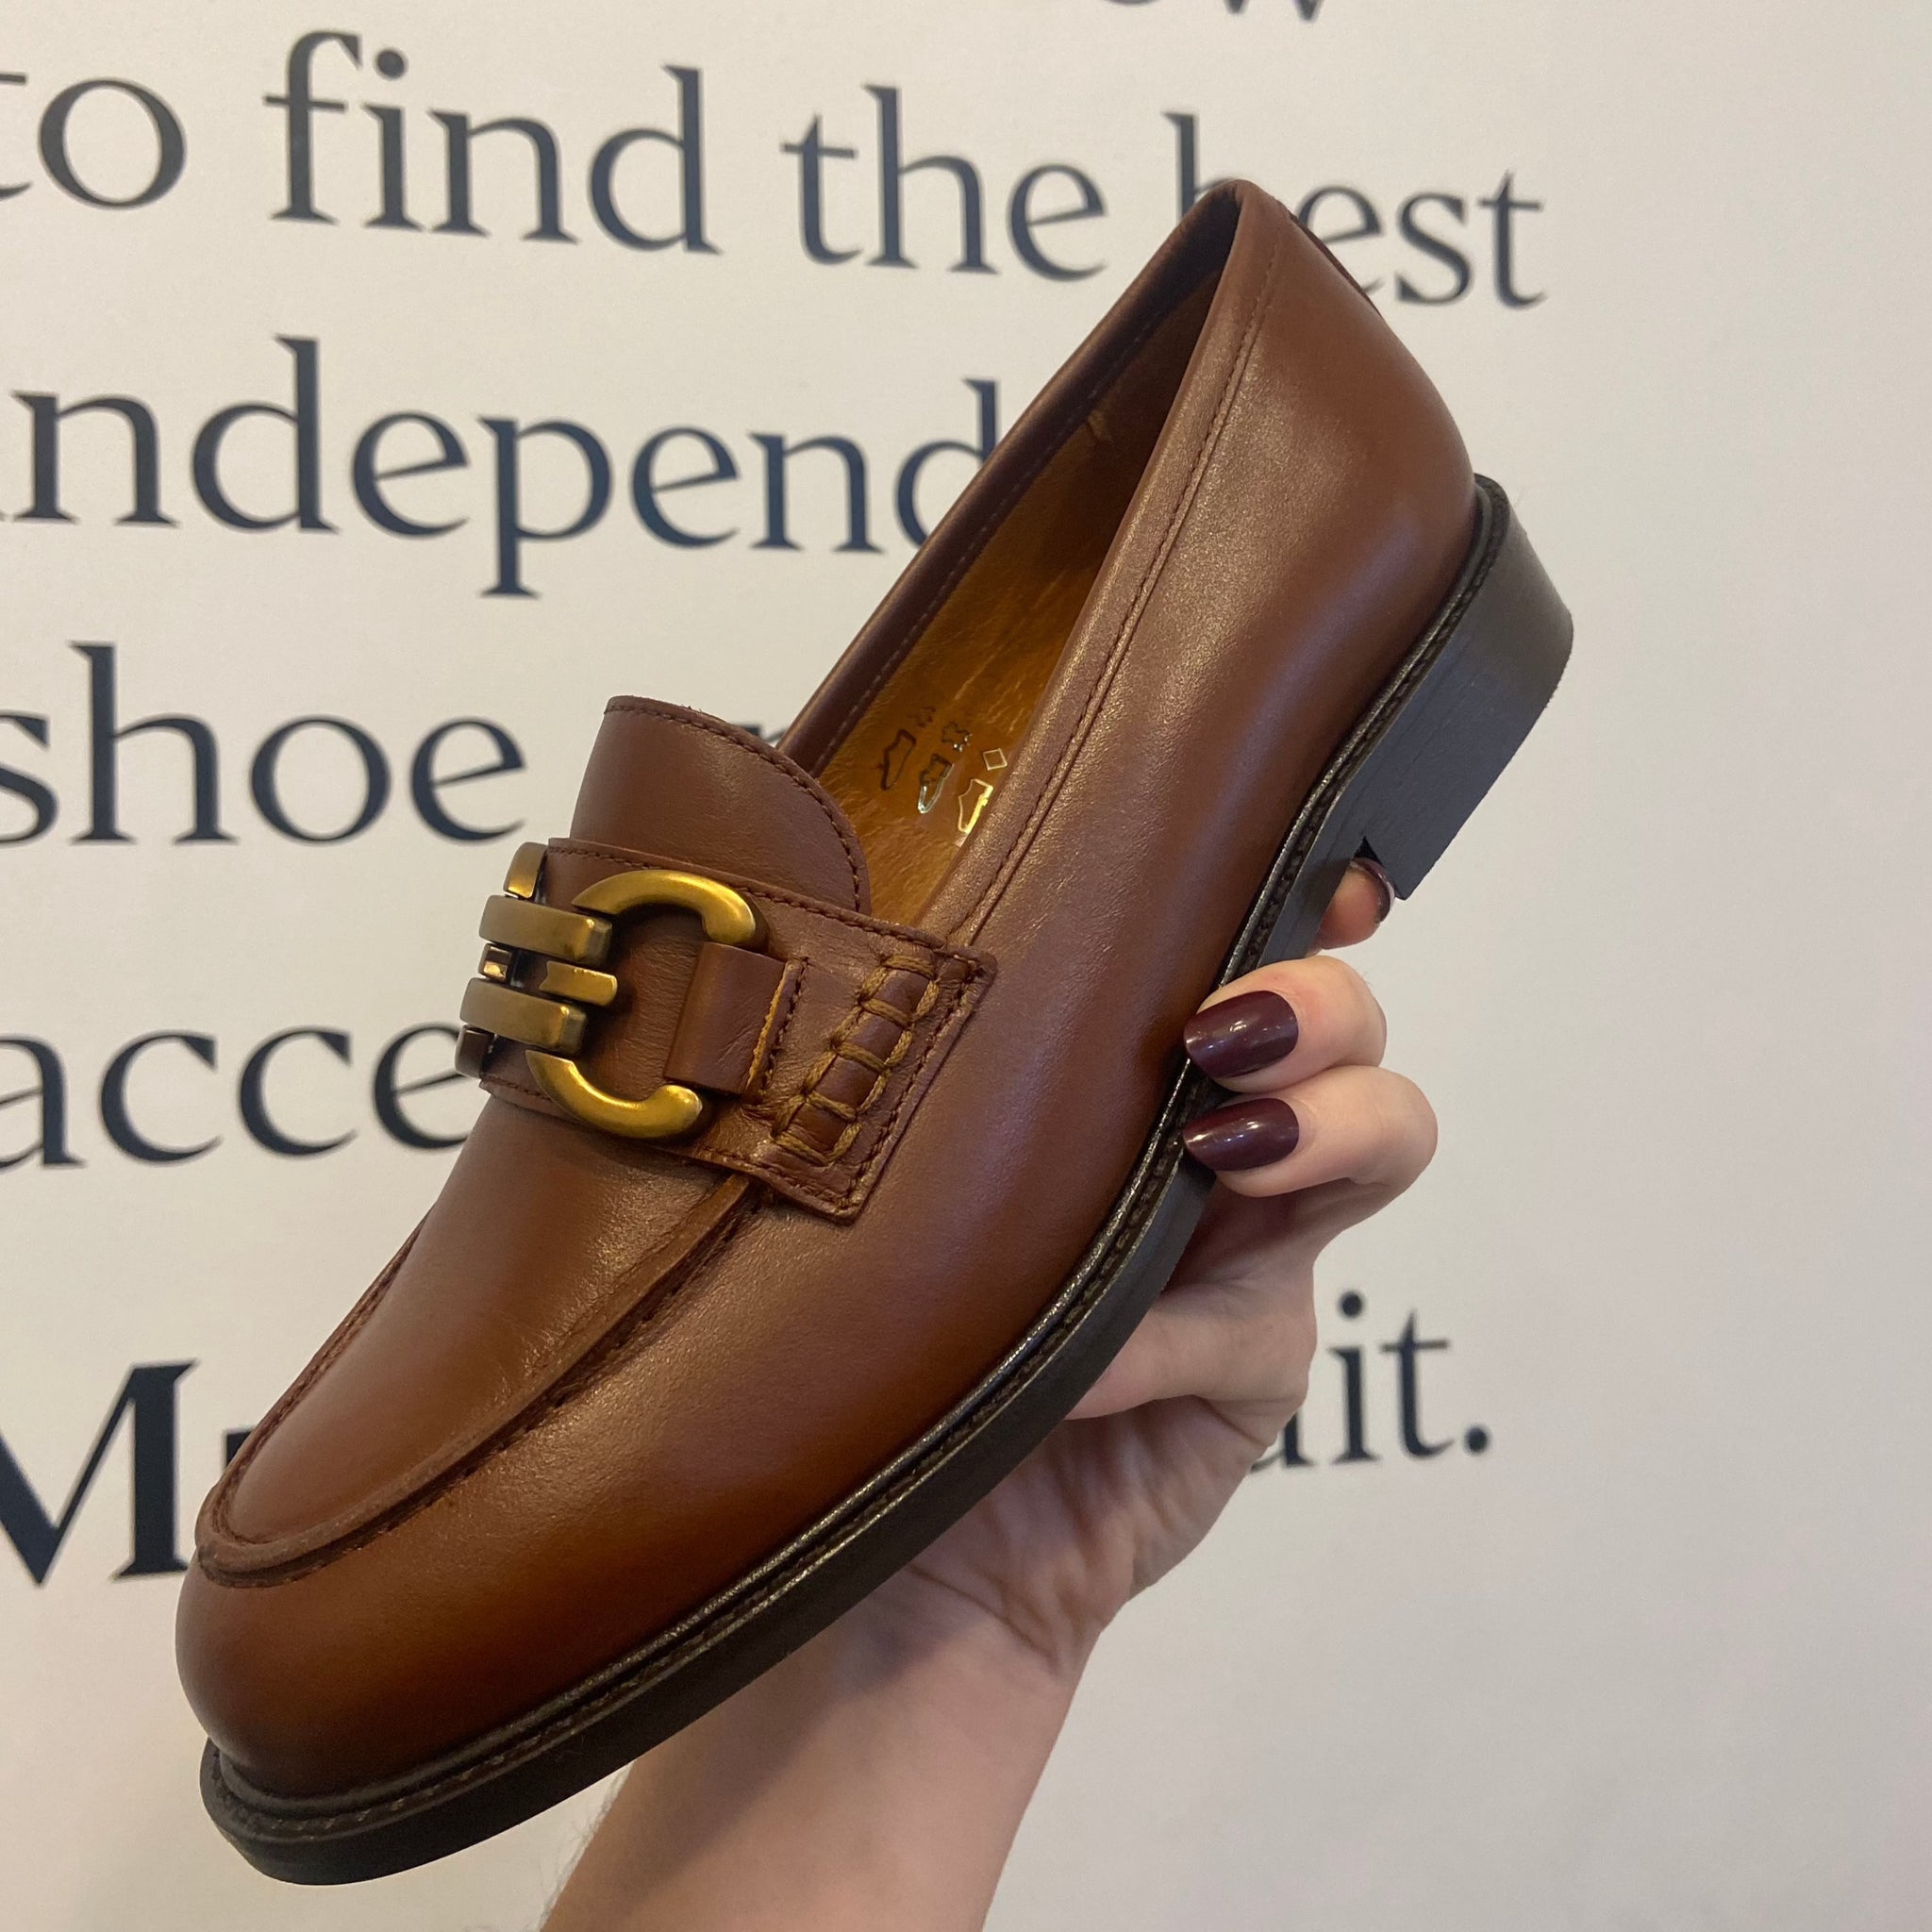 Maison Toufet Lyna Cognac Loafer - MADE THE EDIT